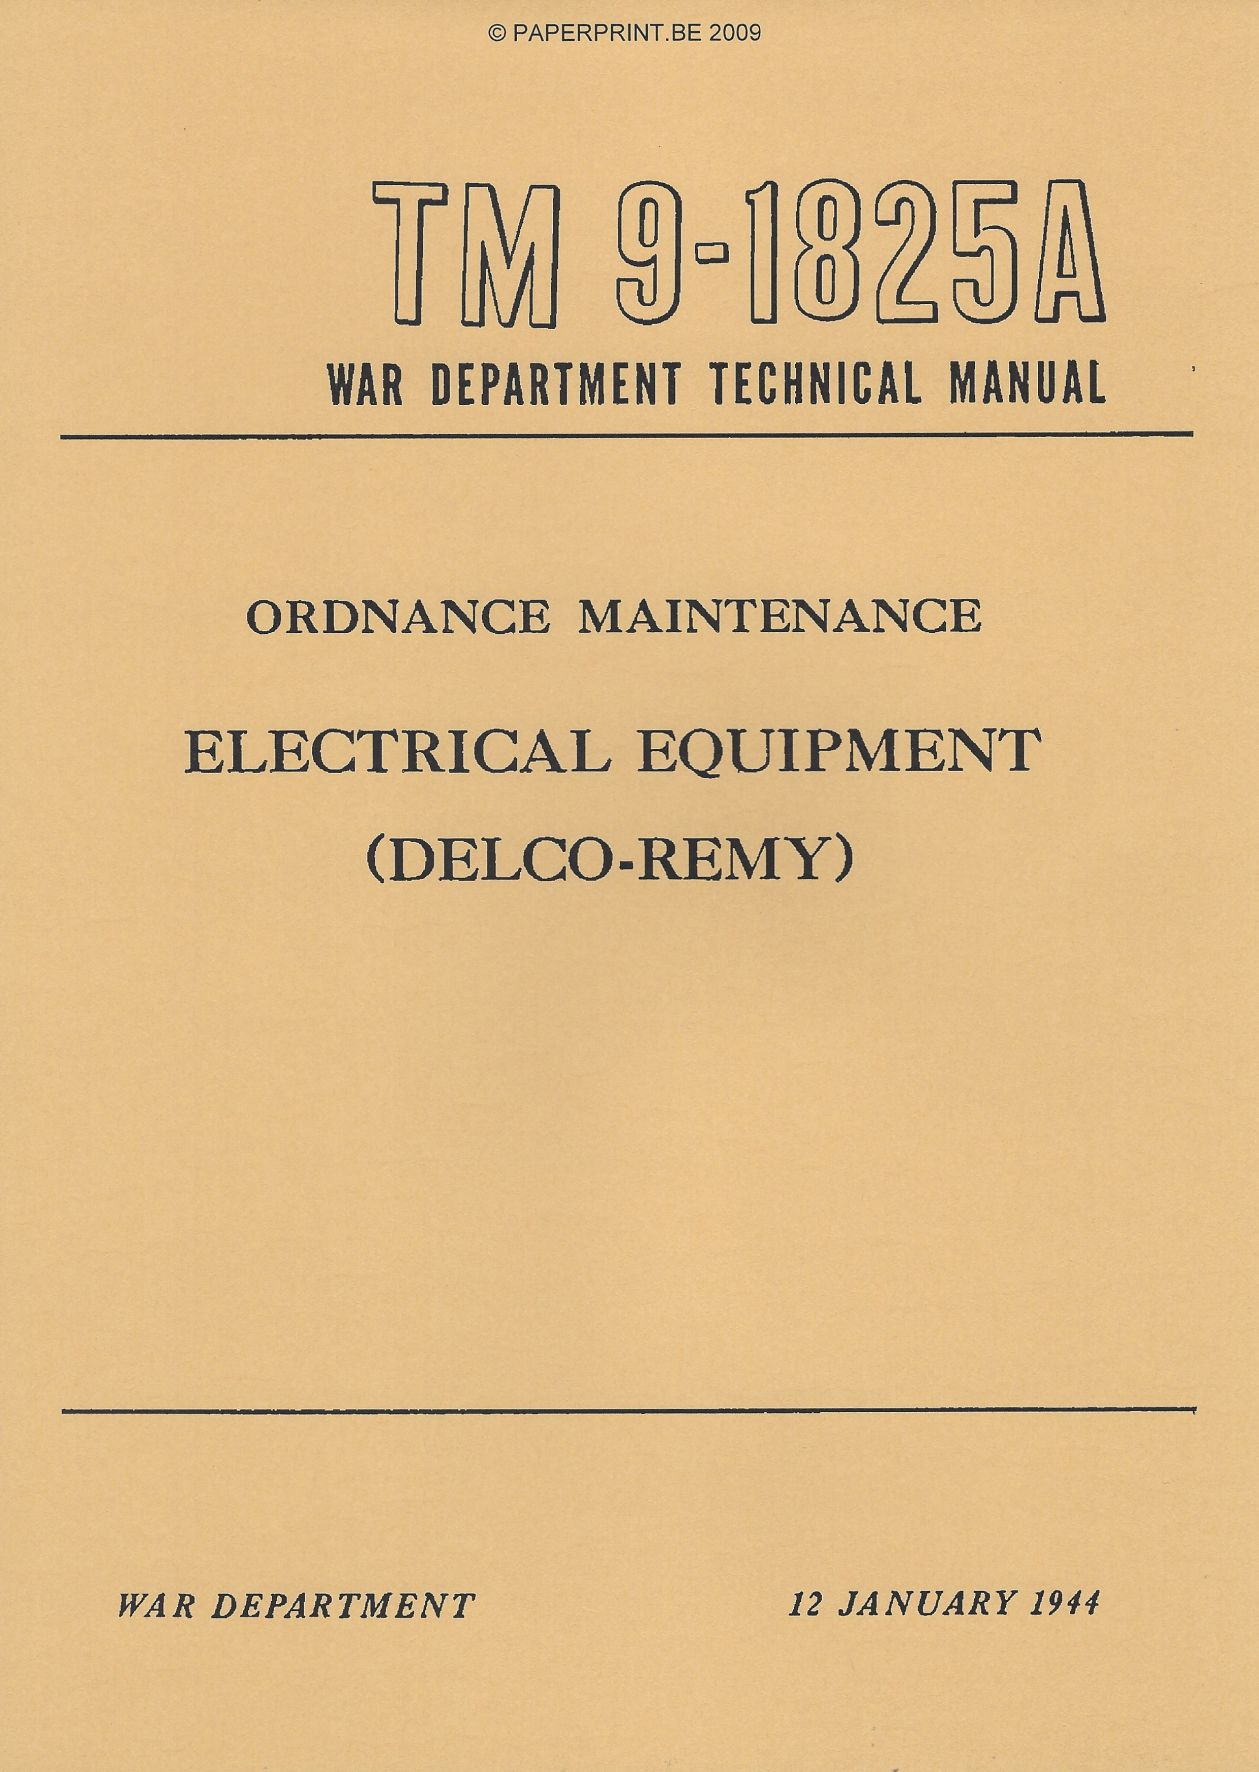 TM 9-1825A US ELECTRICAL EQUIPMENT (DELCO-REMY)